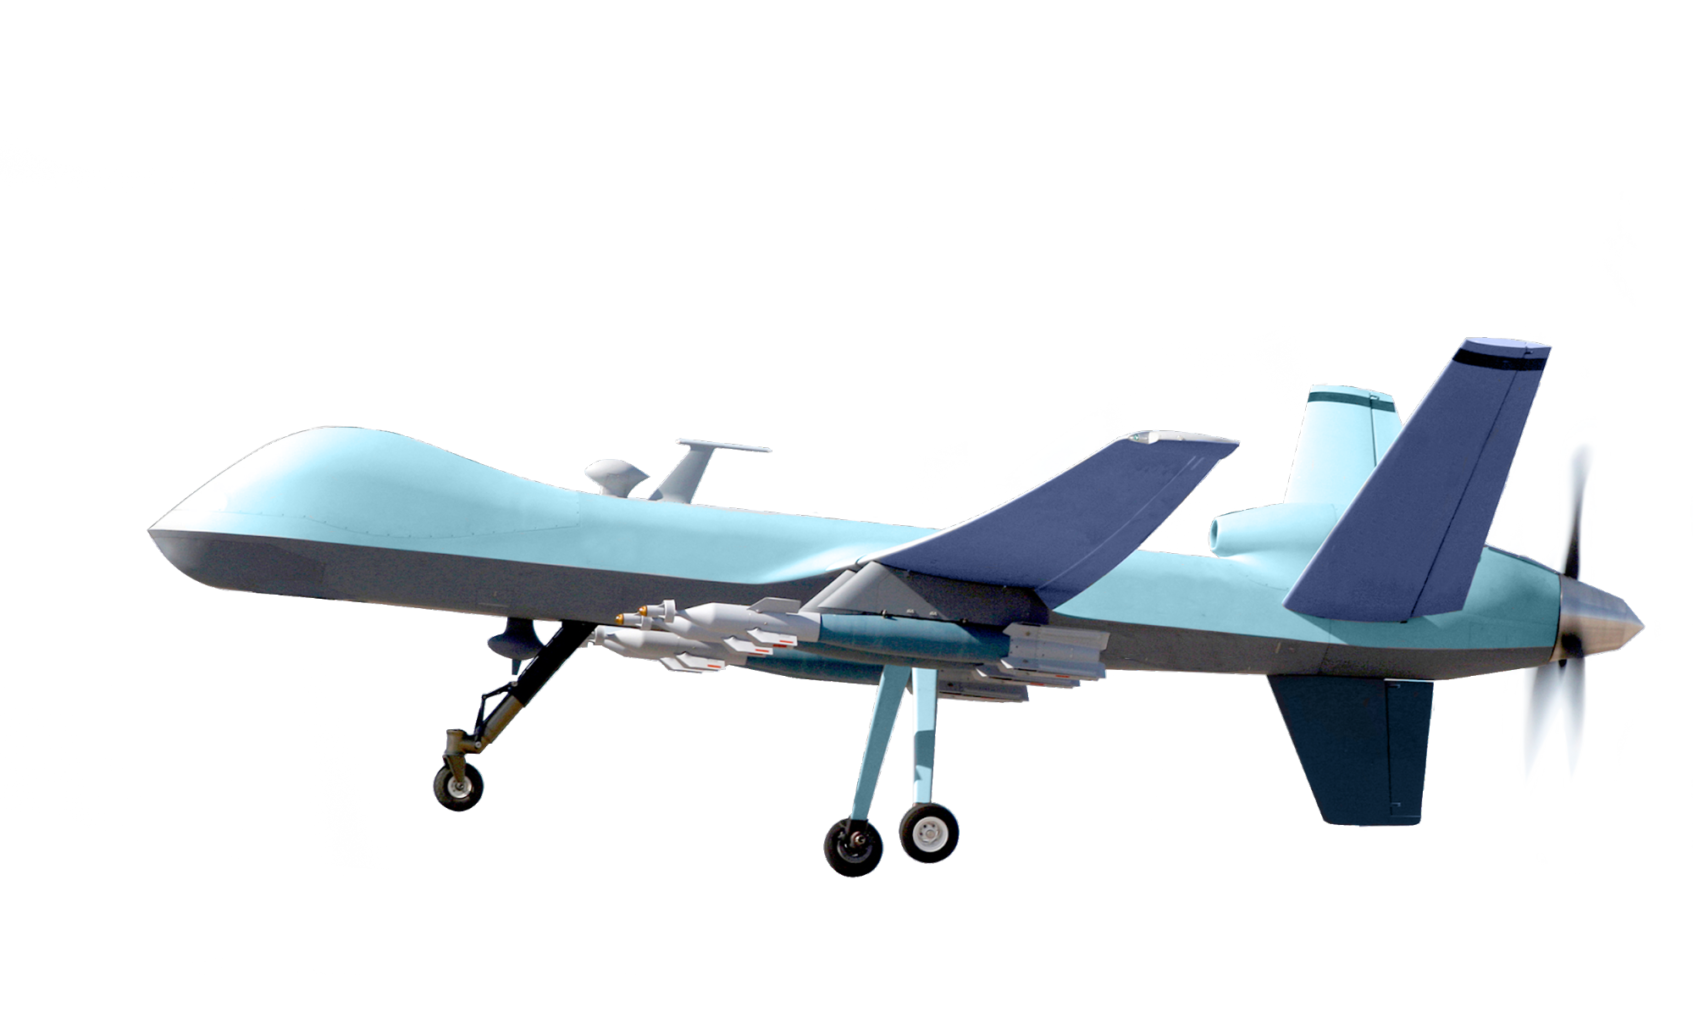 Unnamed Combat Aerial Vehicles